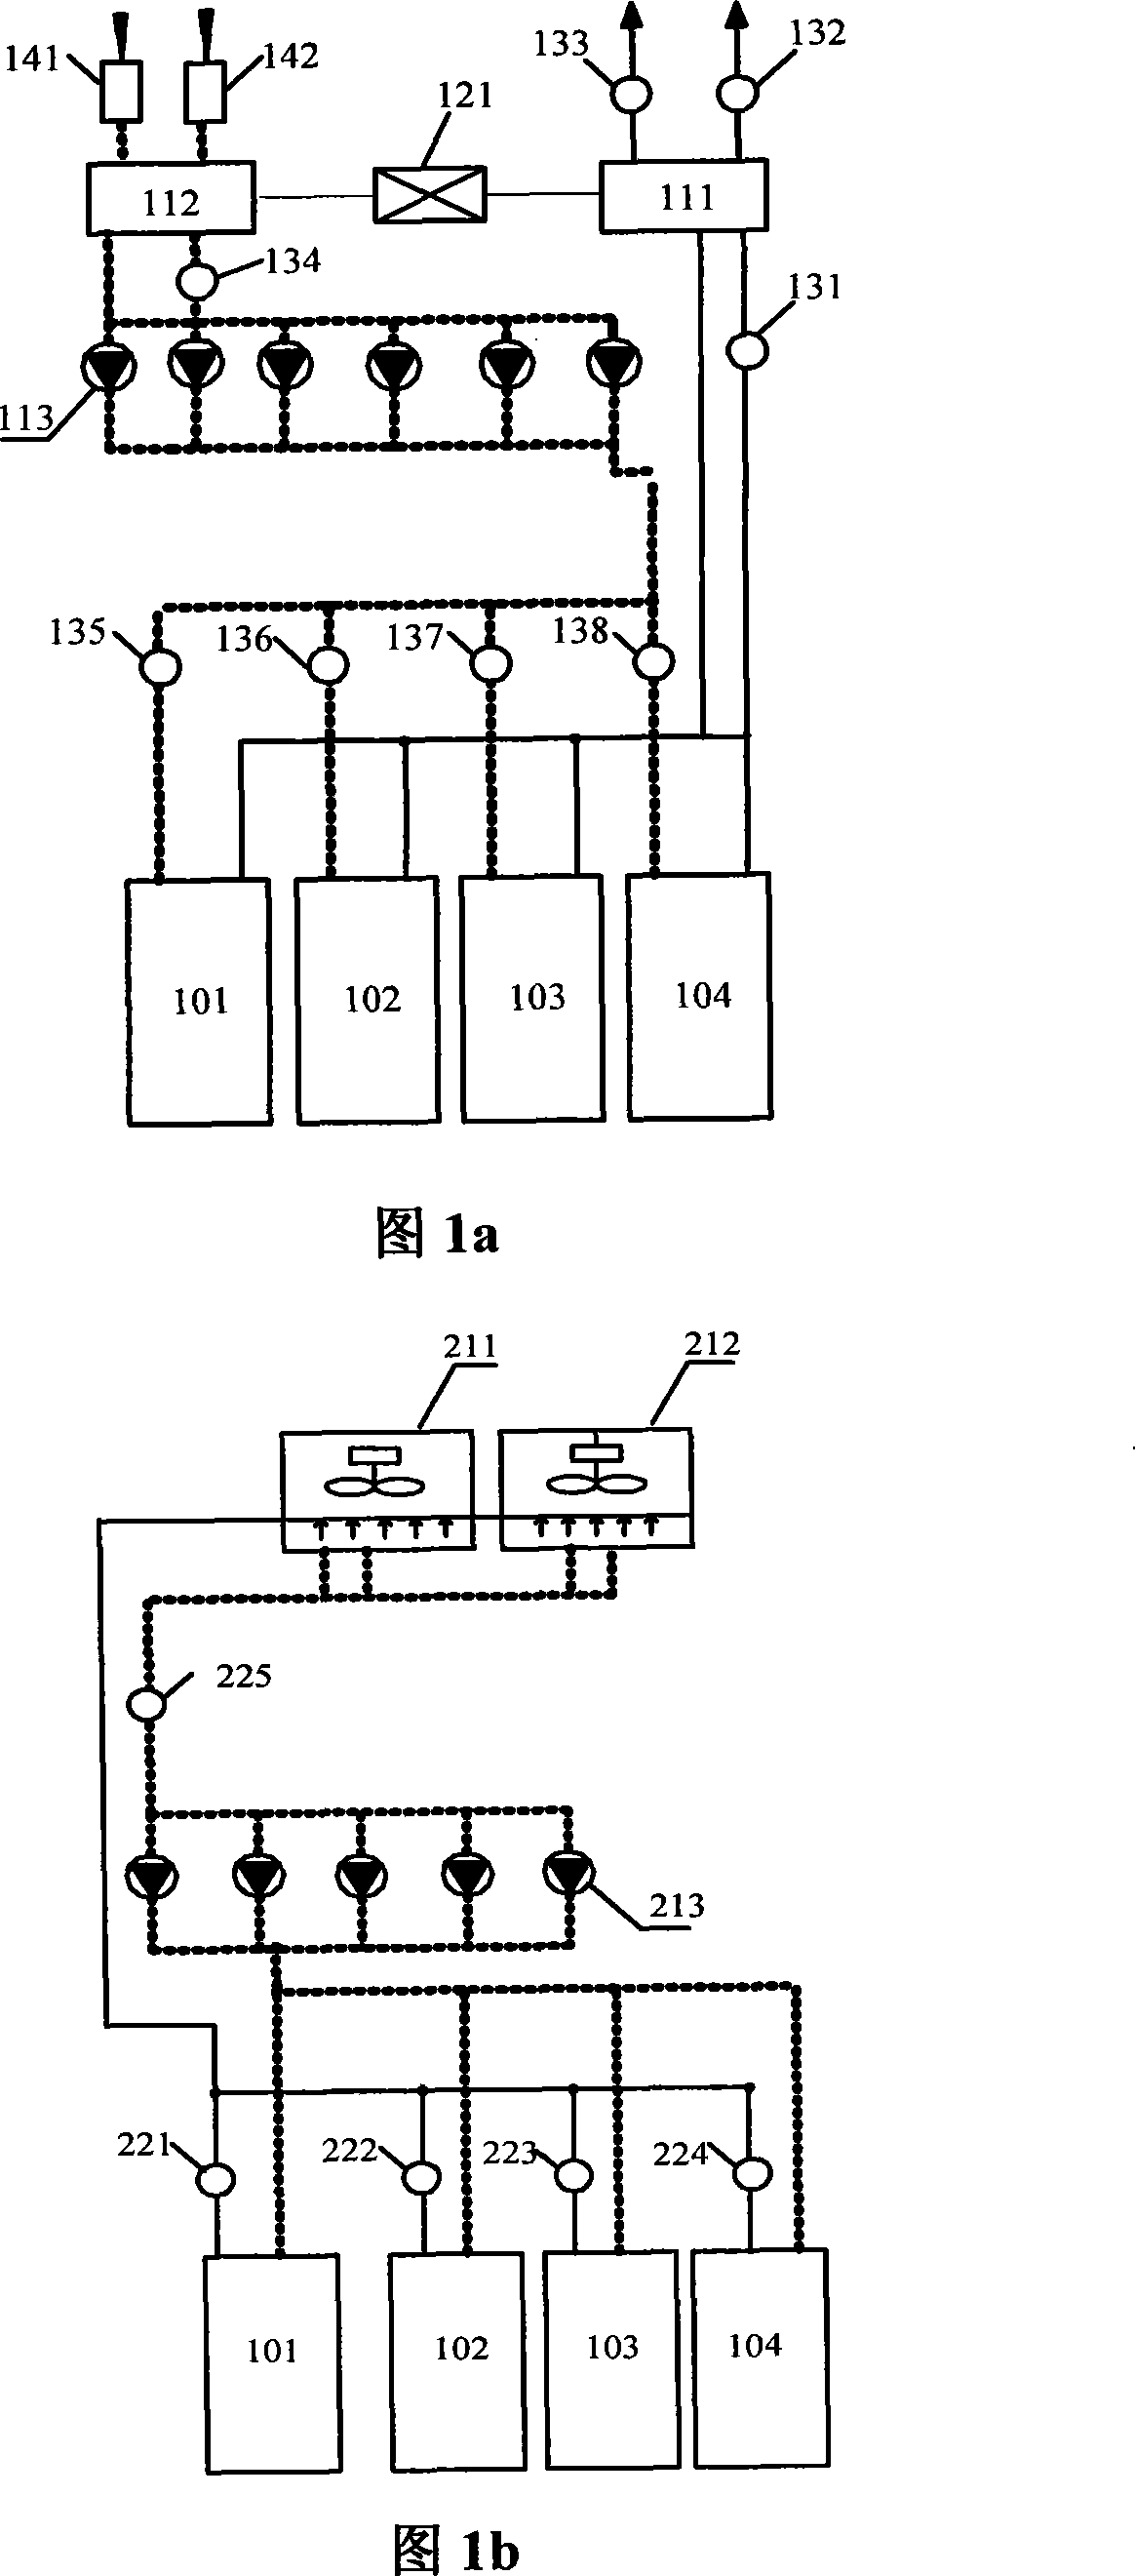 Electricity economizer centralized management method and system of central air-conditioning